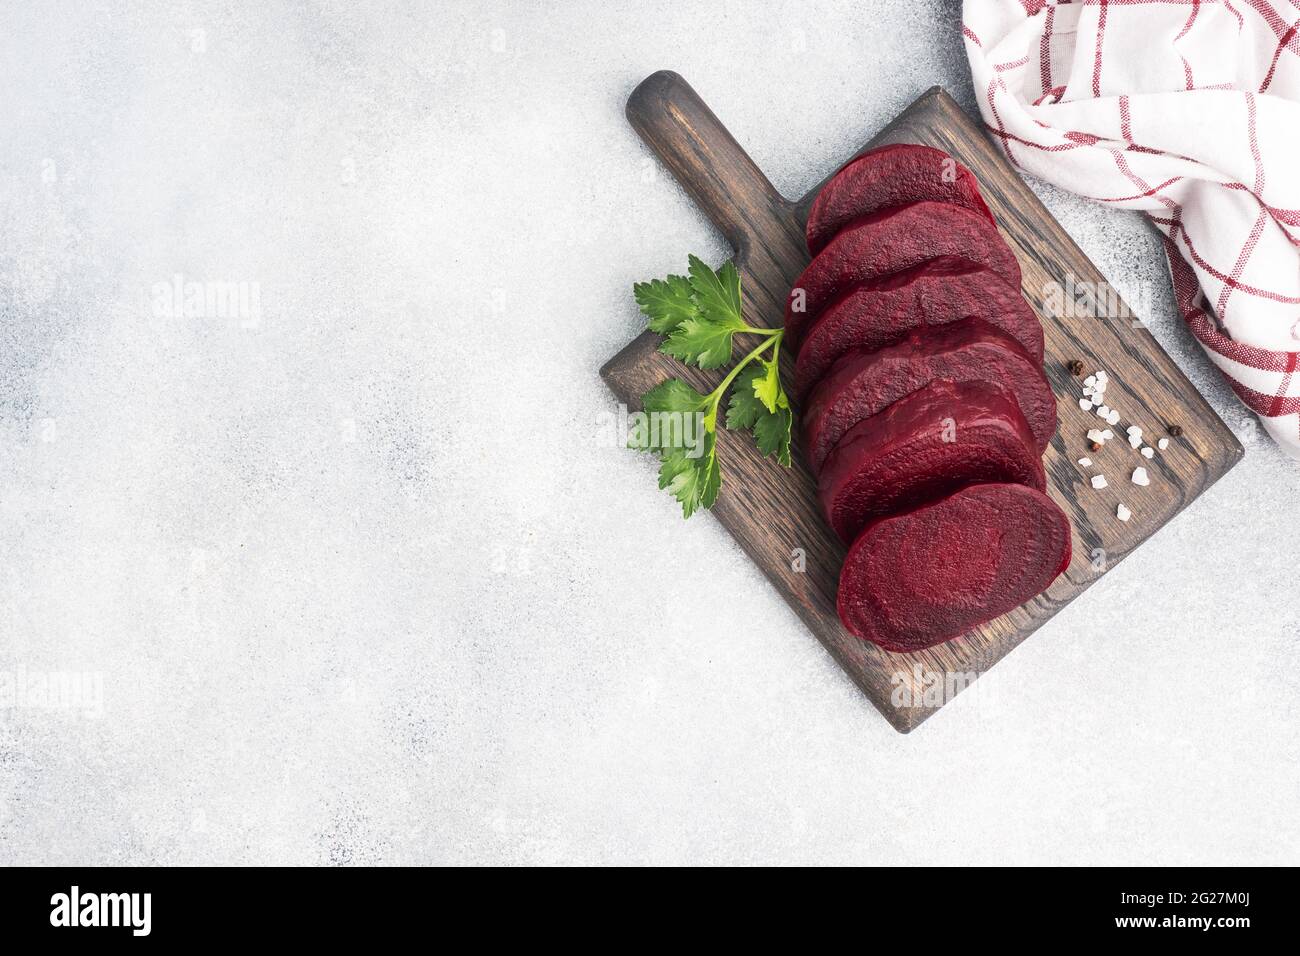 Slices of boiled beetroot on a cutting Board with parsley leaves on a wooden rustic background. Copy space, Stock Photo